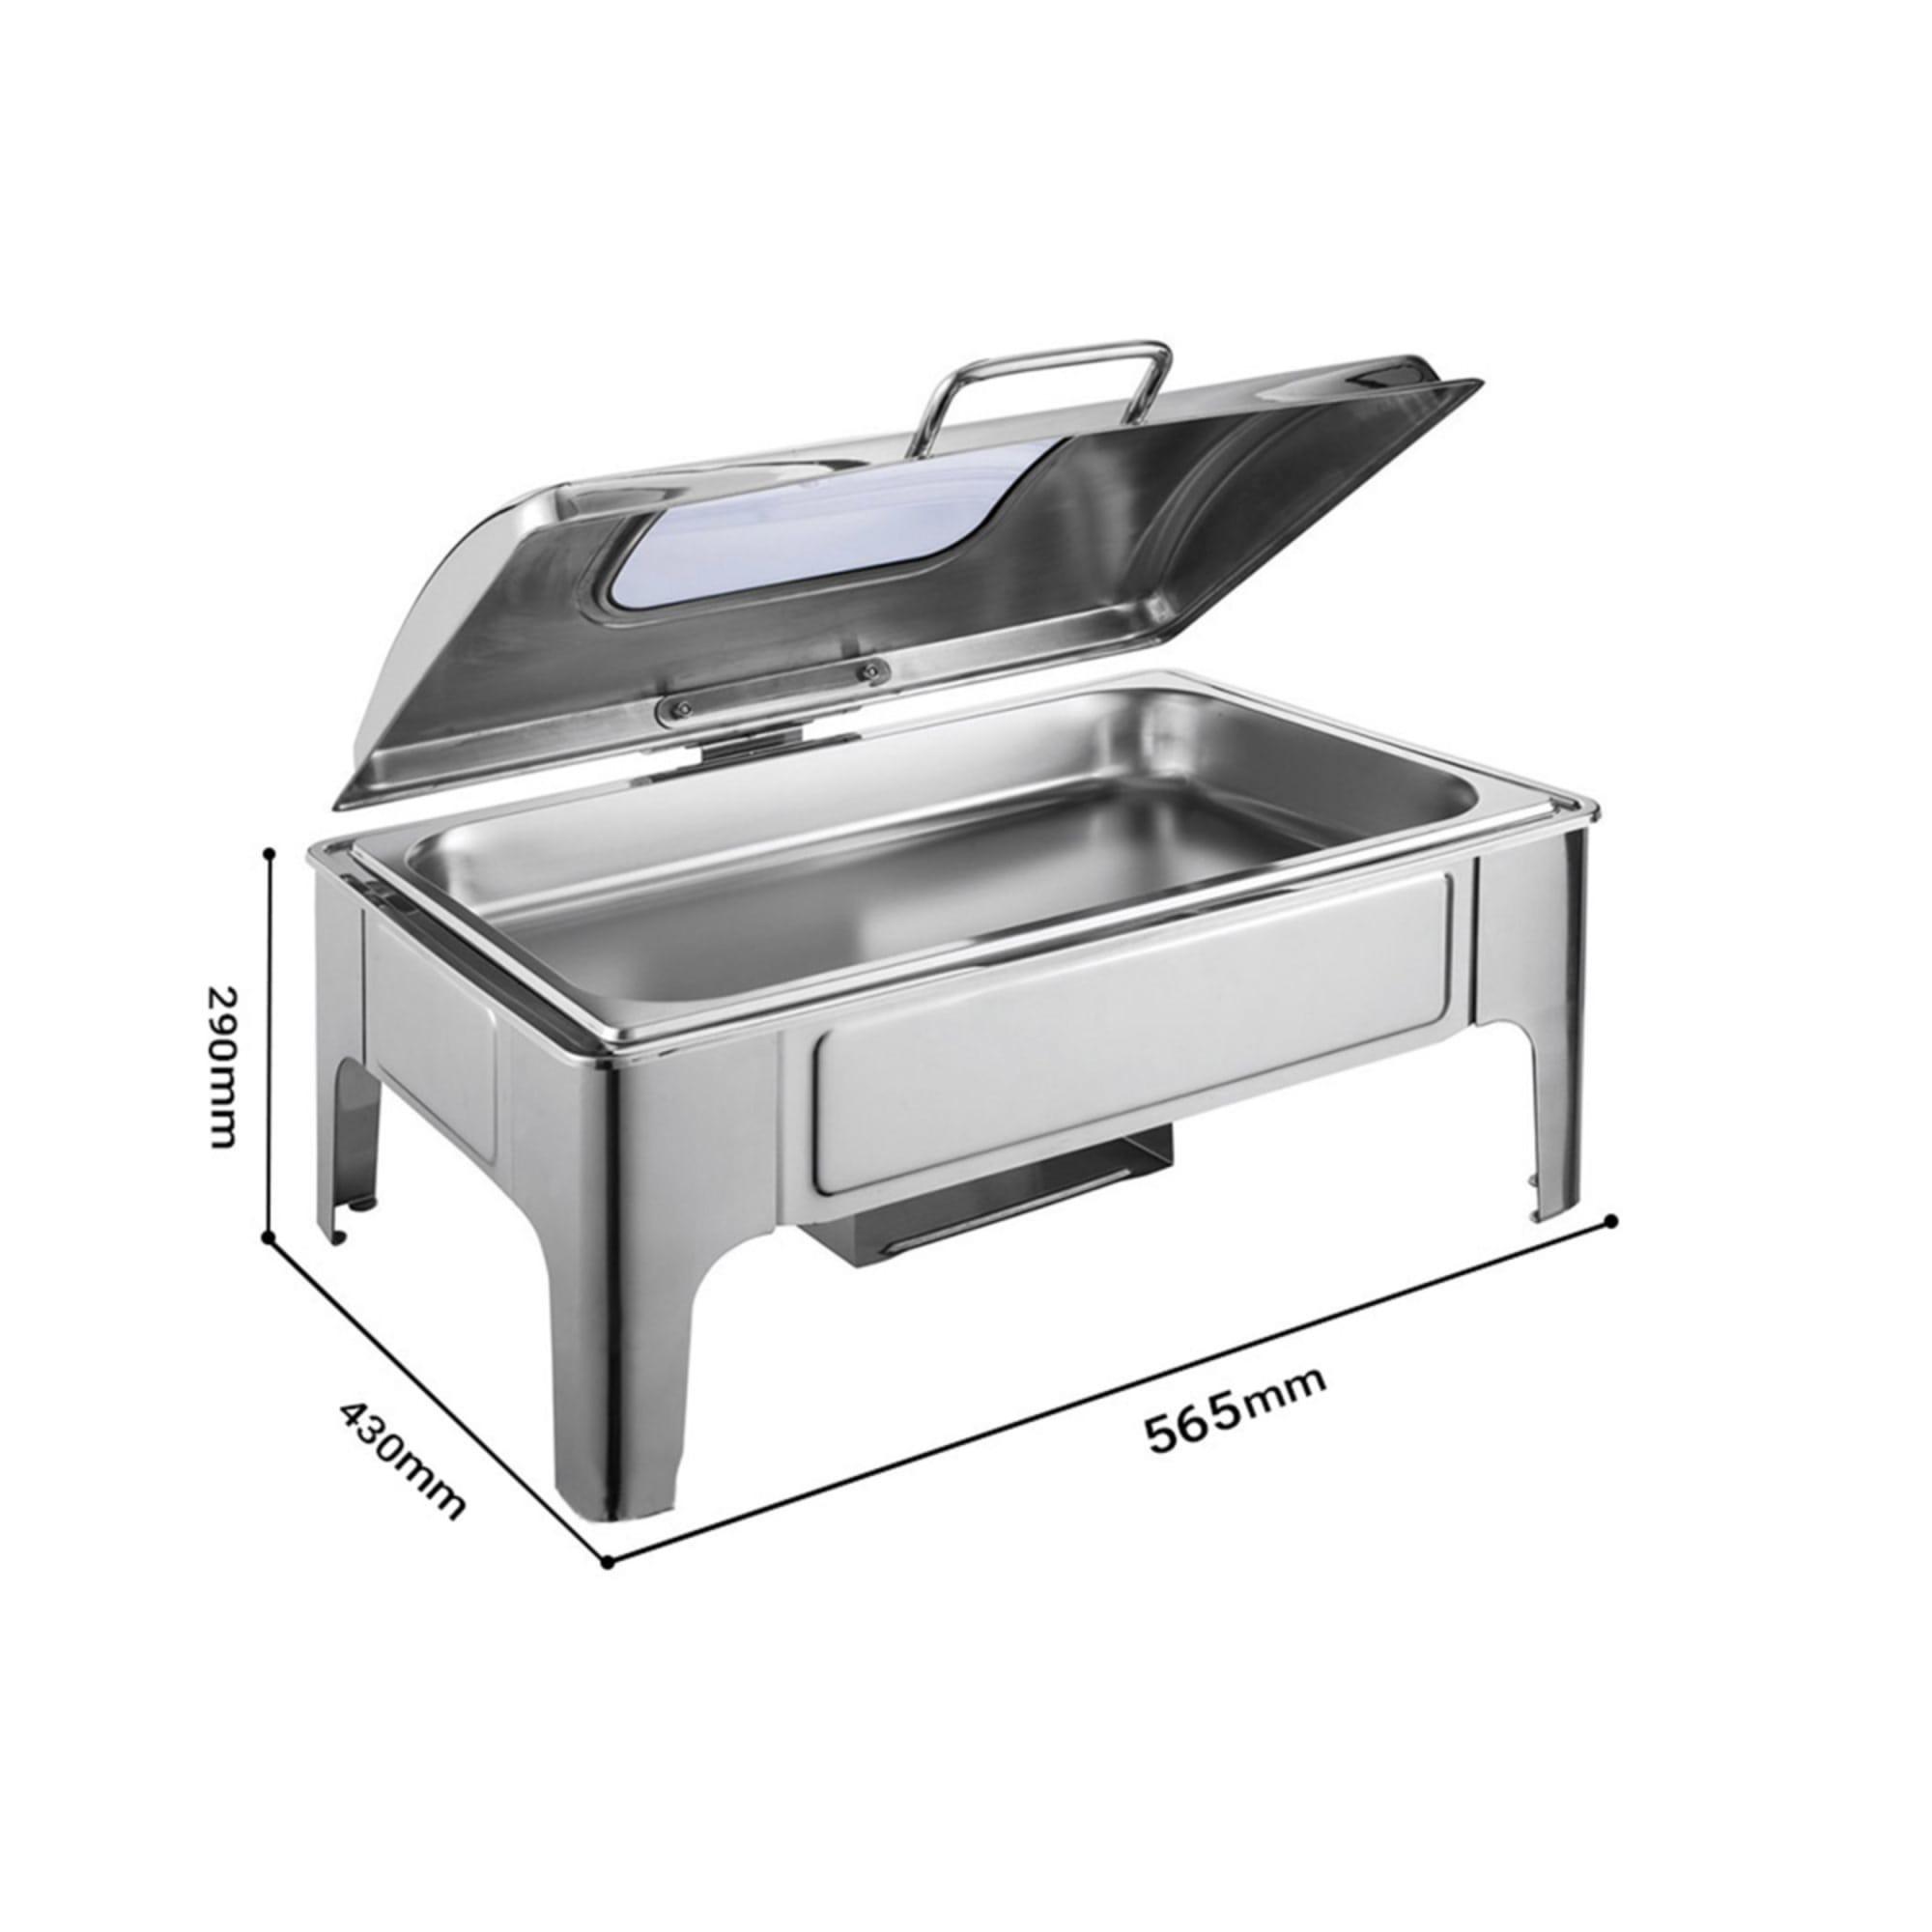 Soga Rectangular Stainless Steel Chafing Dish with Window Lid Image 8